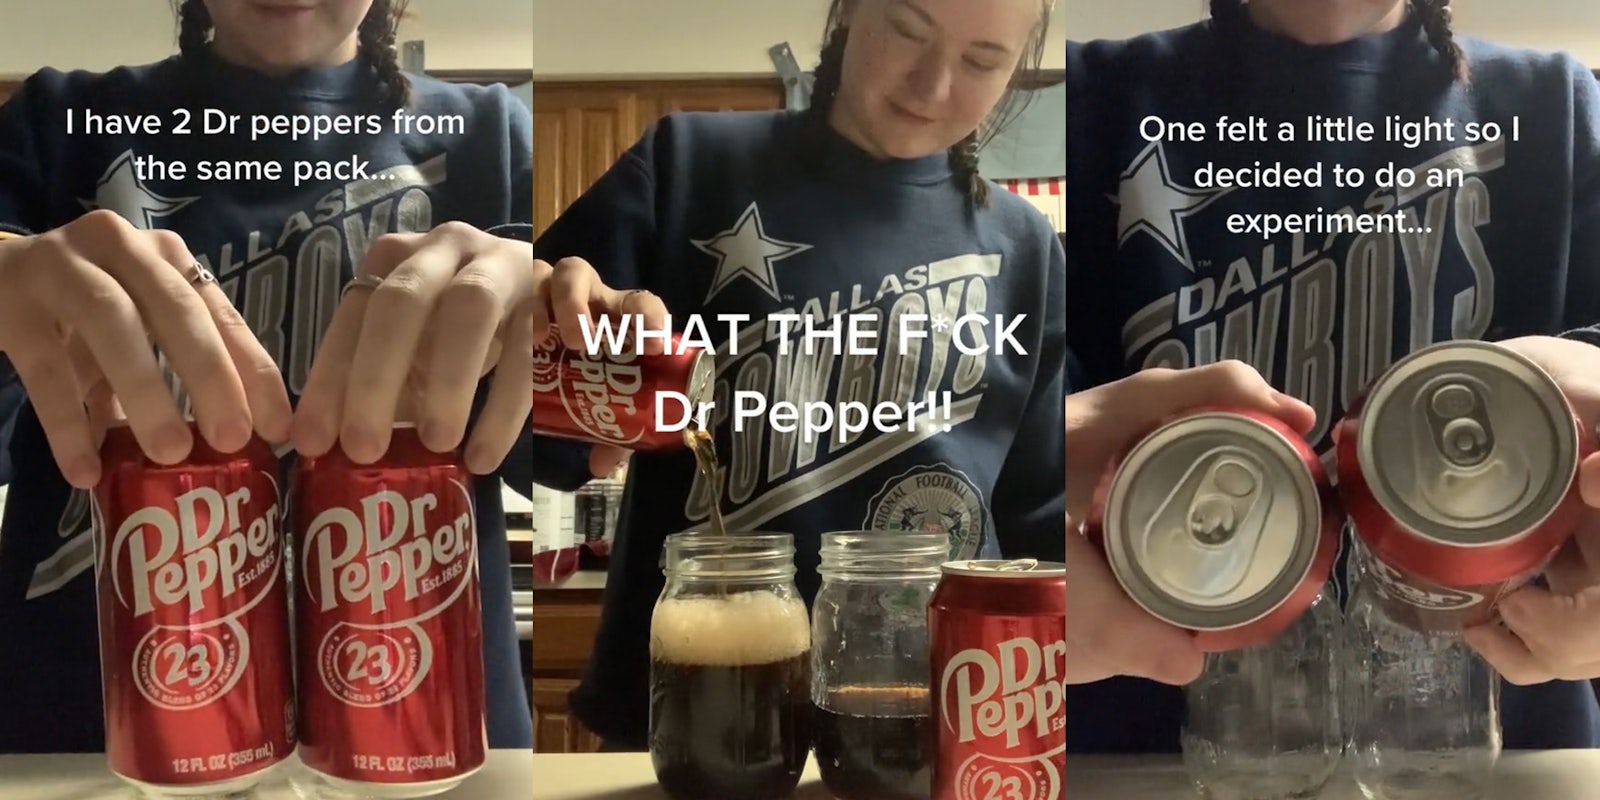 person holding 2 cans of Dr Pepper with caption 'I have 2 Dr peppers from the same pack...' (l) person pouring Dr Pepper into cup with caption 'WHAT THE F*CK Dr Pepper!!' (c) person holding 2 cans of Dr Pepper with caption 'One felt a little light so I decided to do an experiment...' (r)